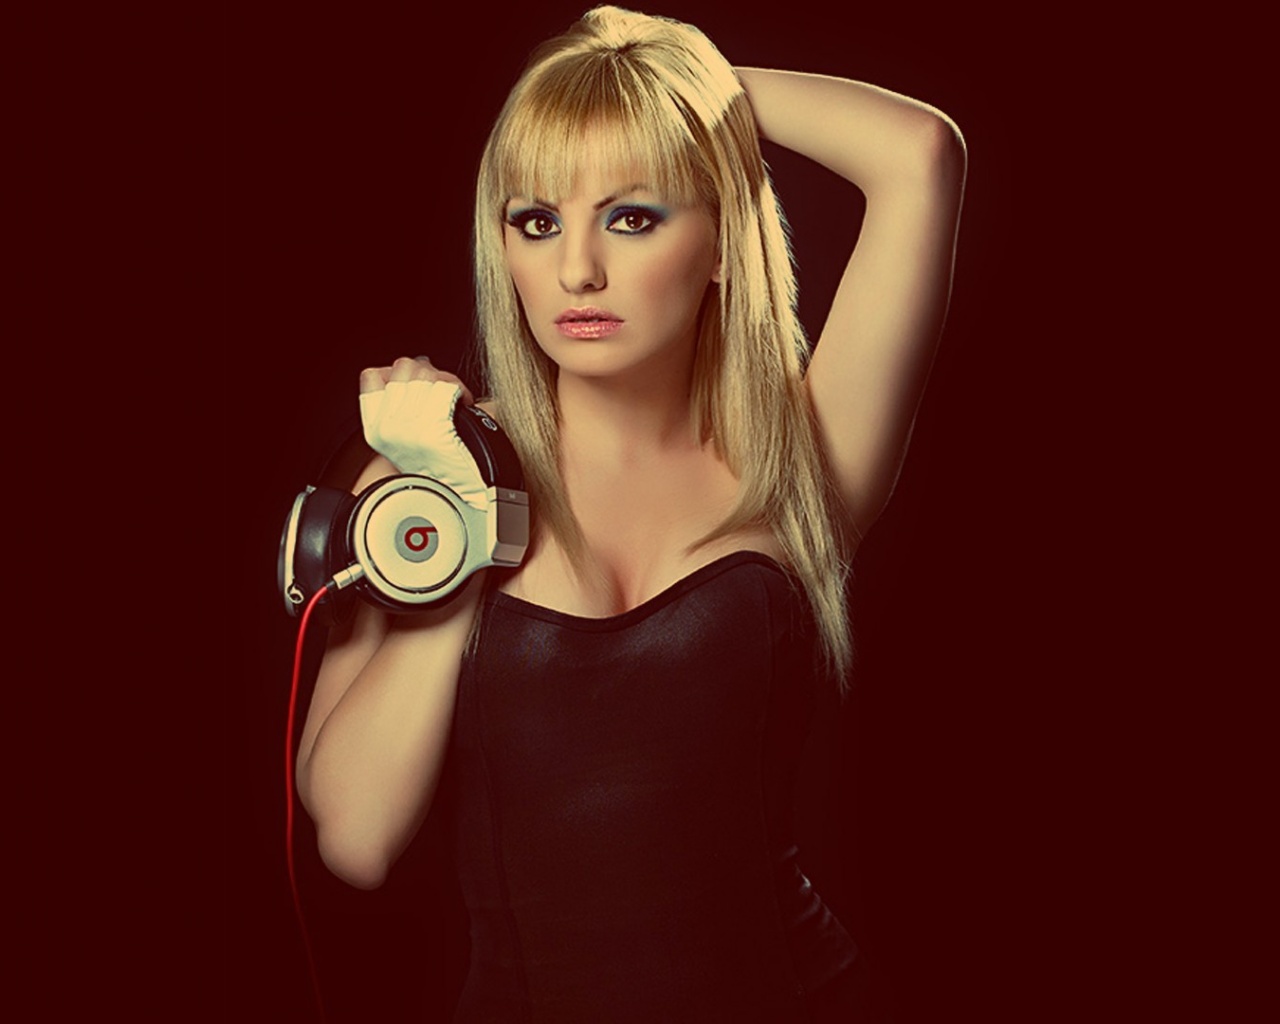 Beautiful TV & Movie Photos, Alexandra Stan in Blonde Straight Hair and Thick Cosmetics, Nice in Look 1280X1024 free wallpaper download